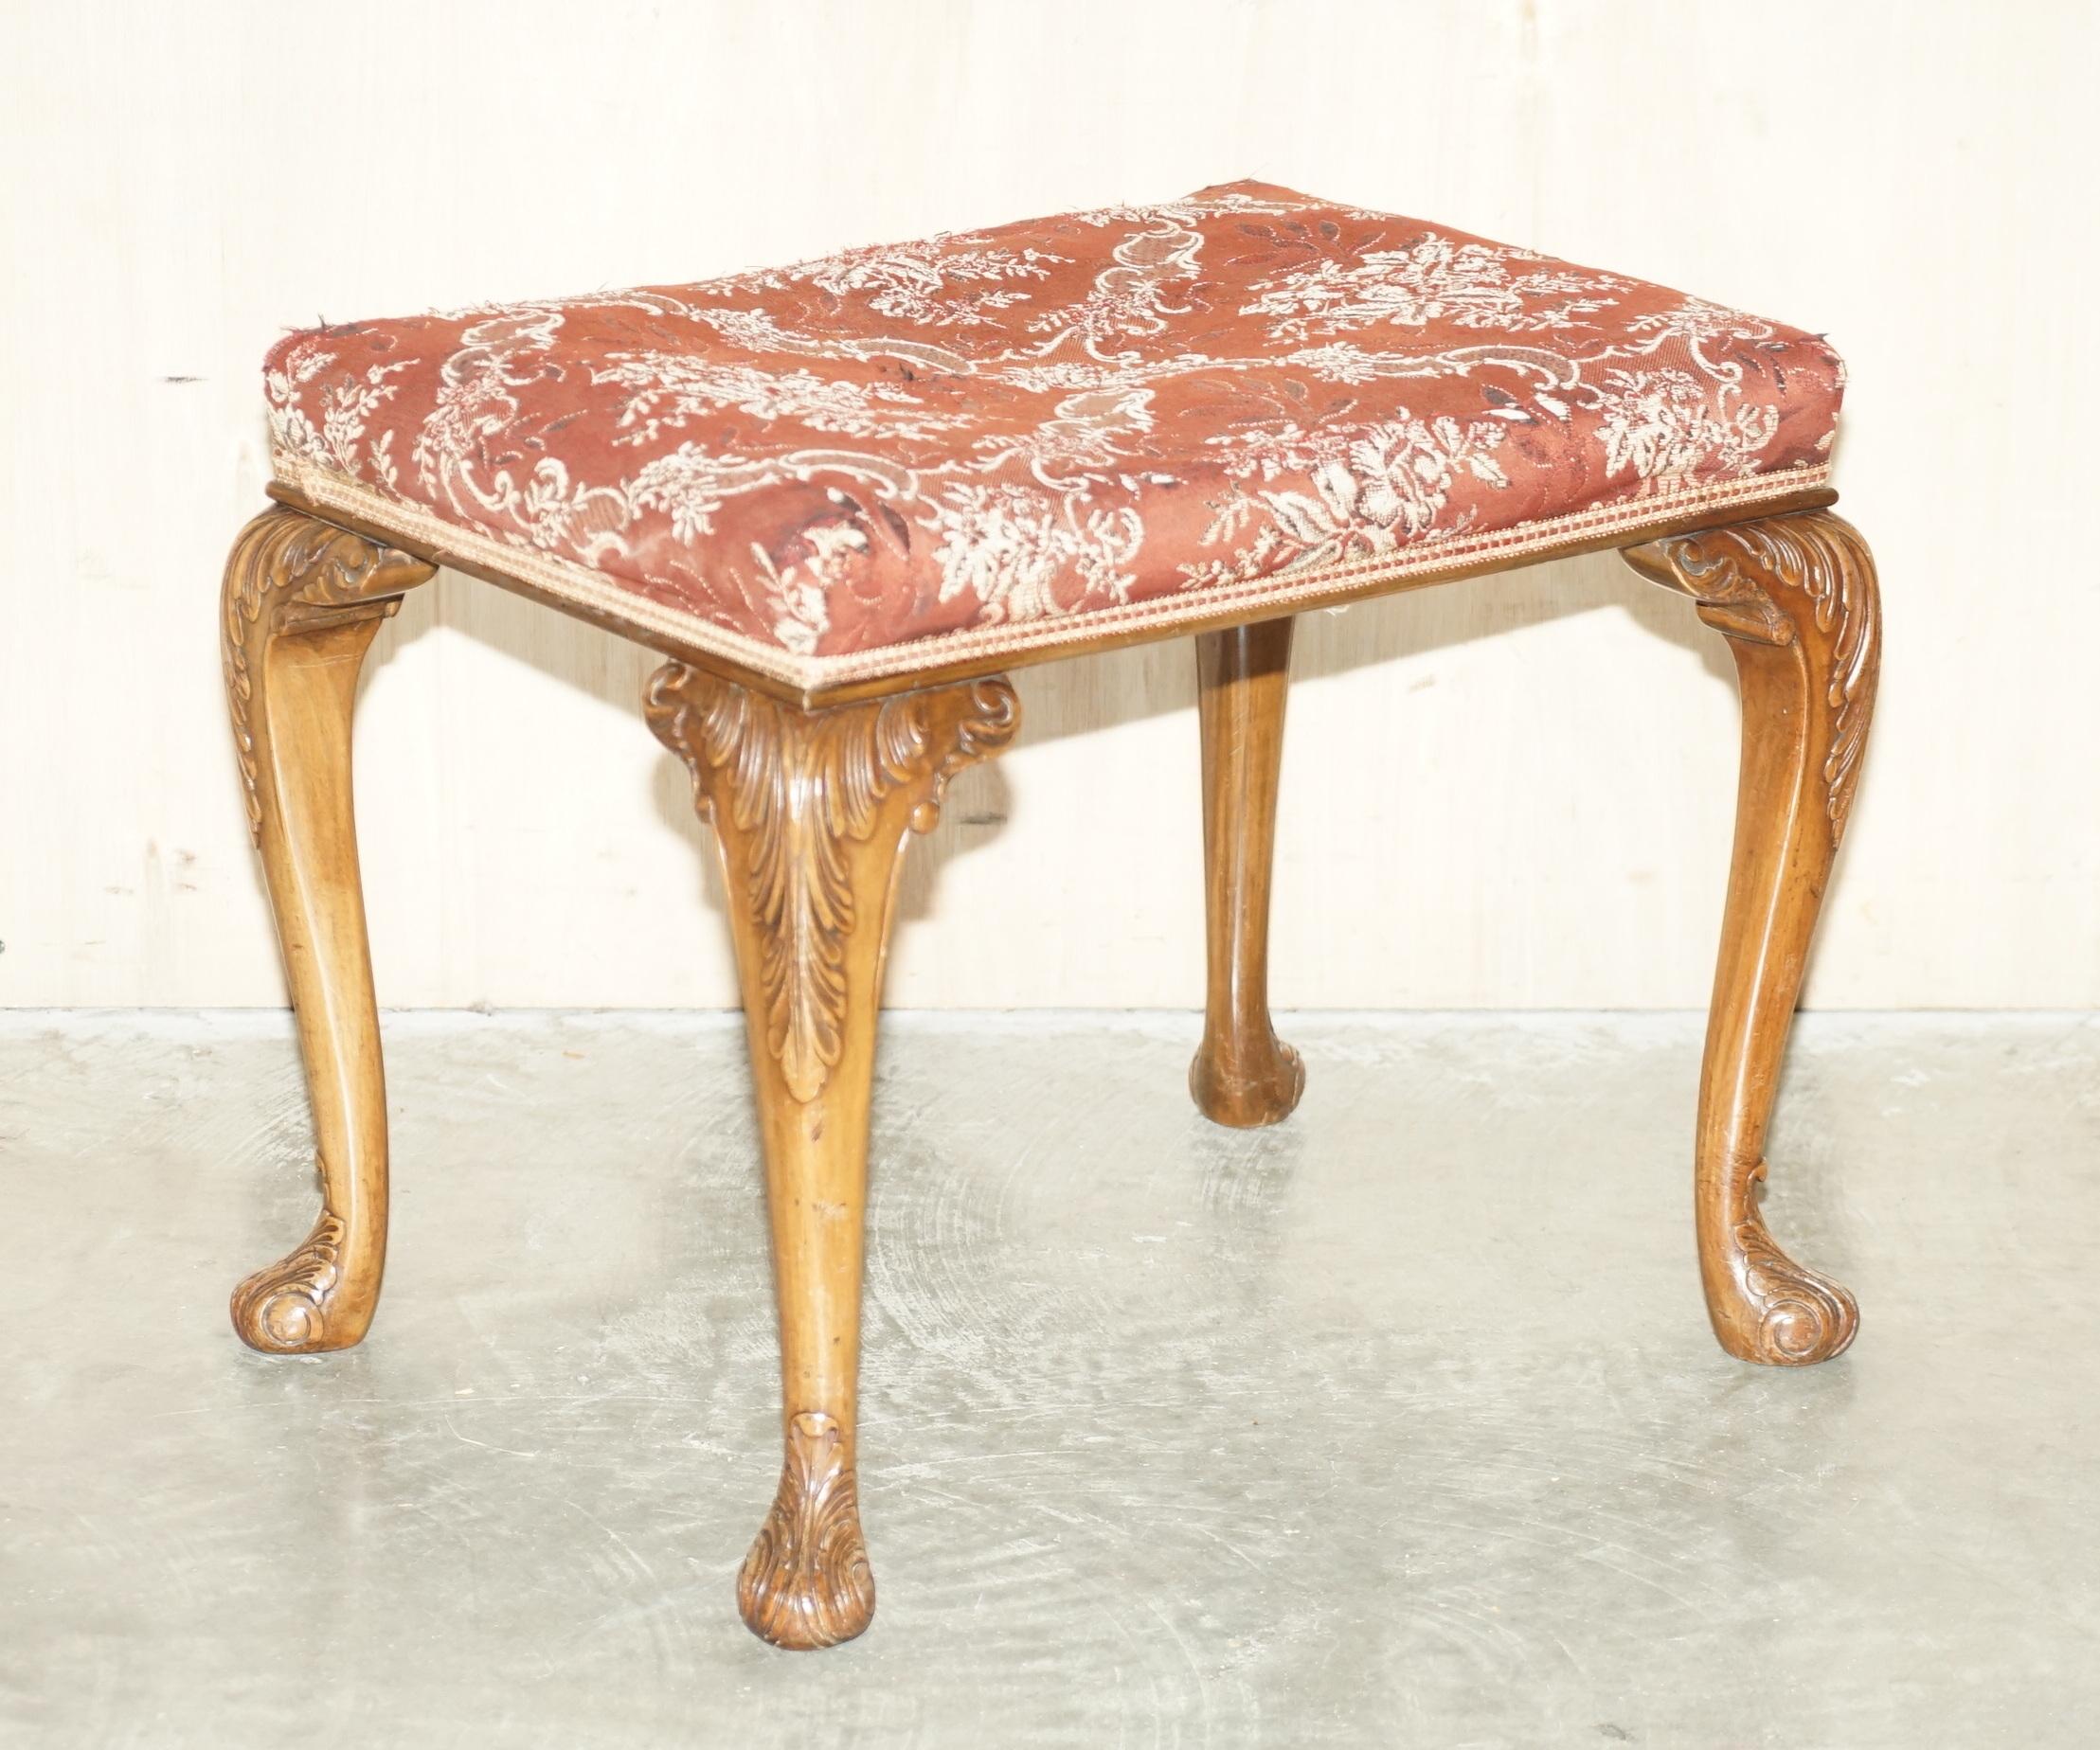 Sublime Quality Burr Walnut Hand Carved Dressing Table & Stool Part of Suite 8